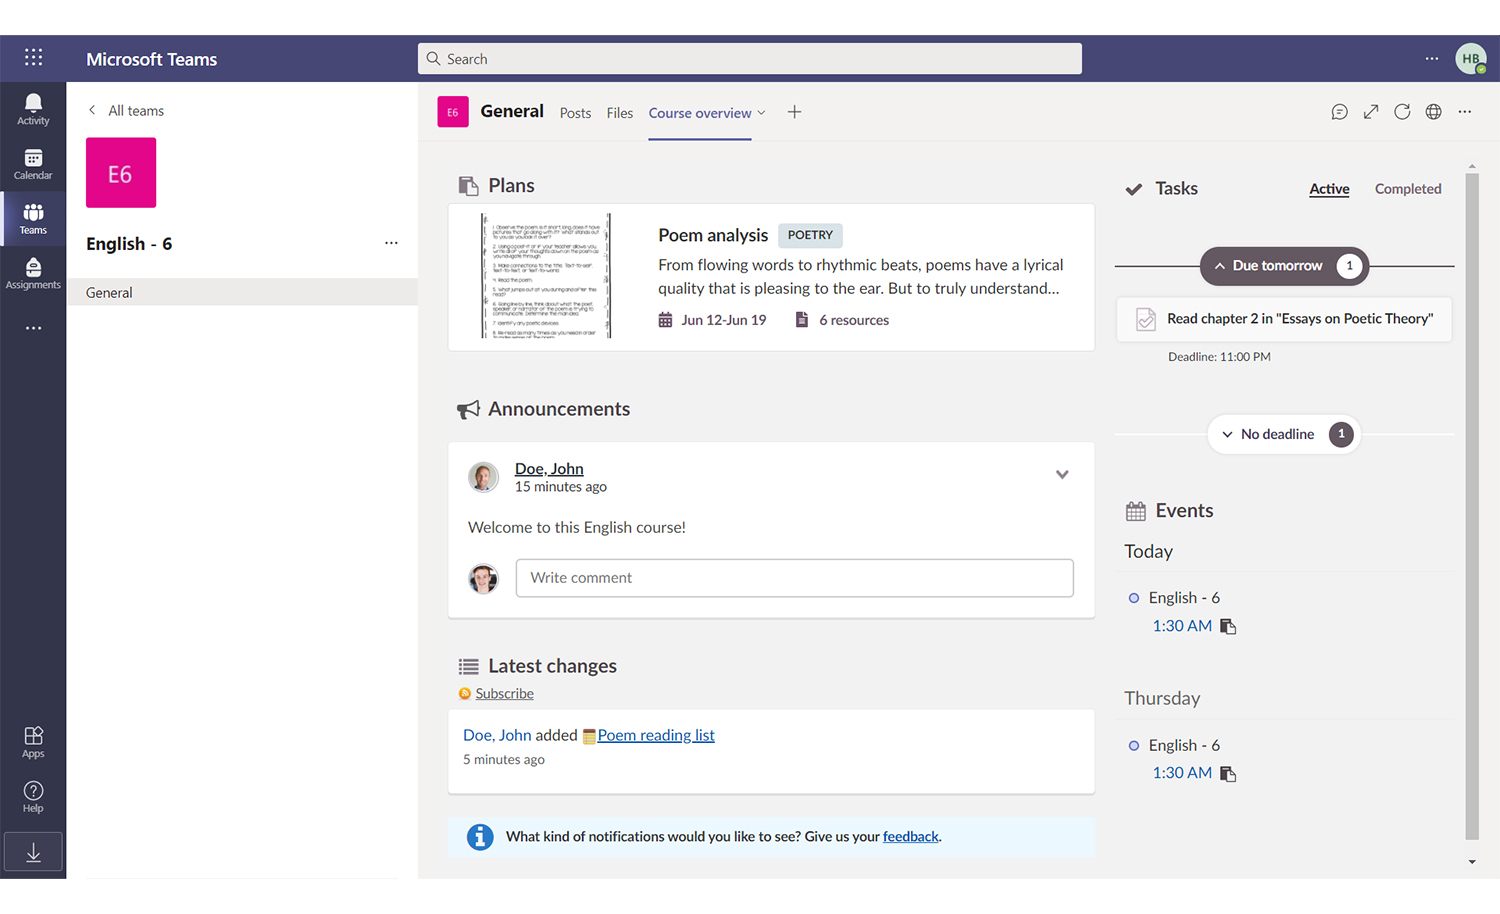 MS Teams integration: The new itslearning and Microsoft Teams integration allows teachers and students to quickly see any current plans, tasks, latest changes or events in their courses without leaving the MS Teams app.